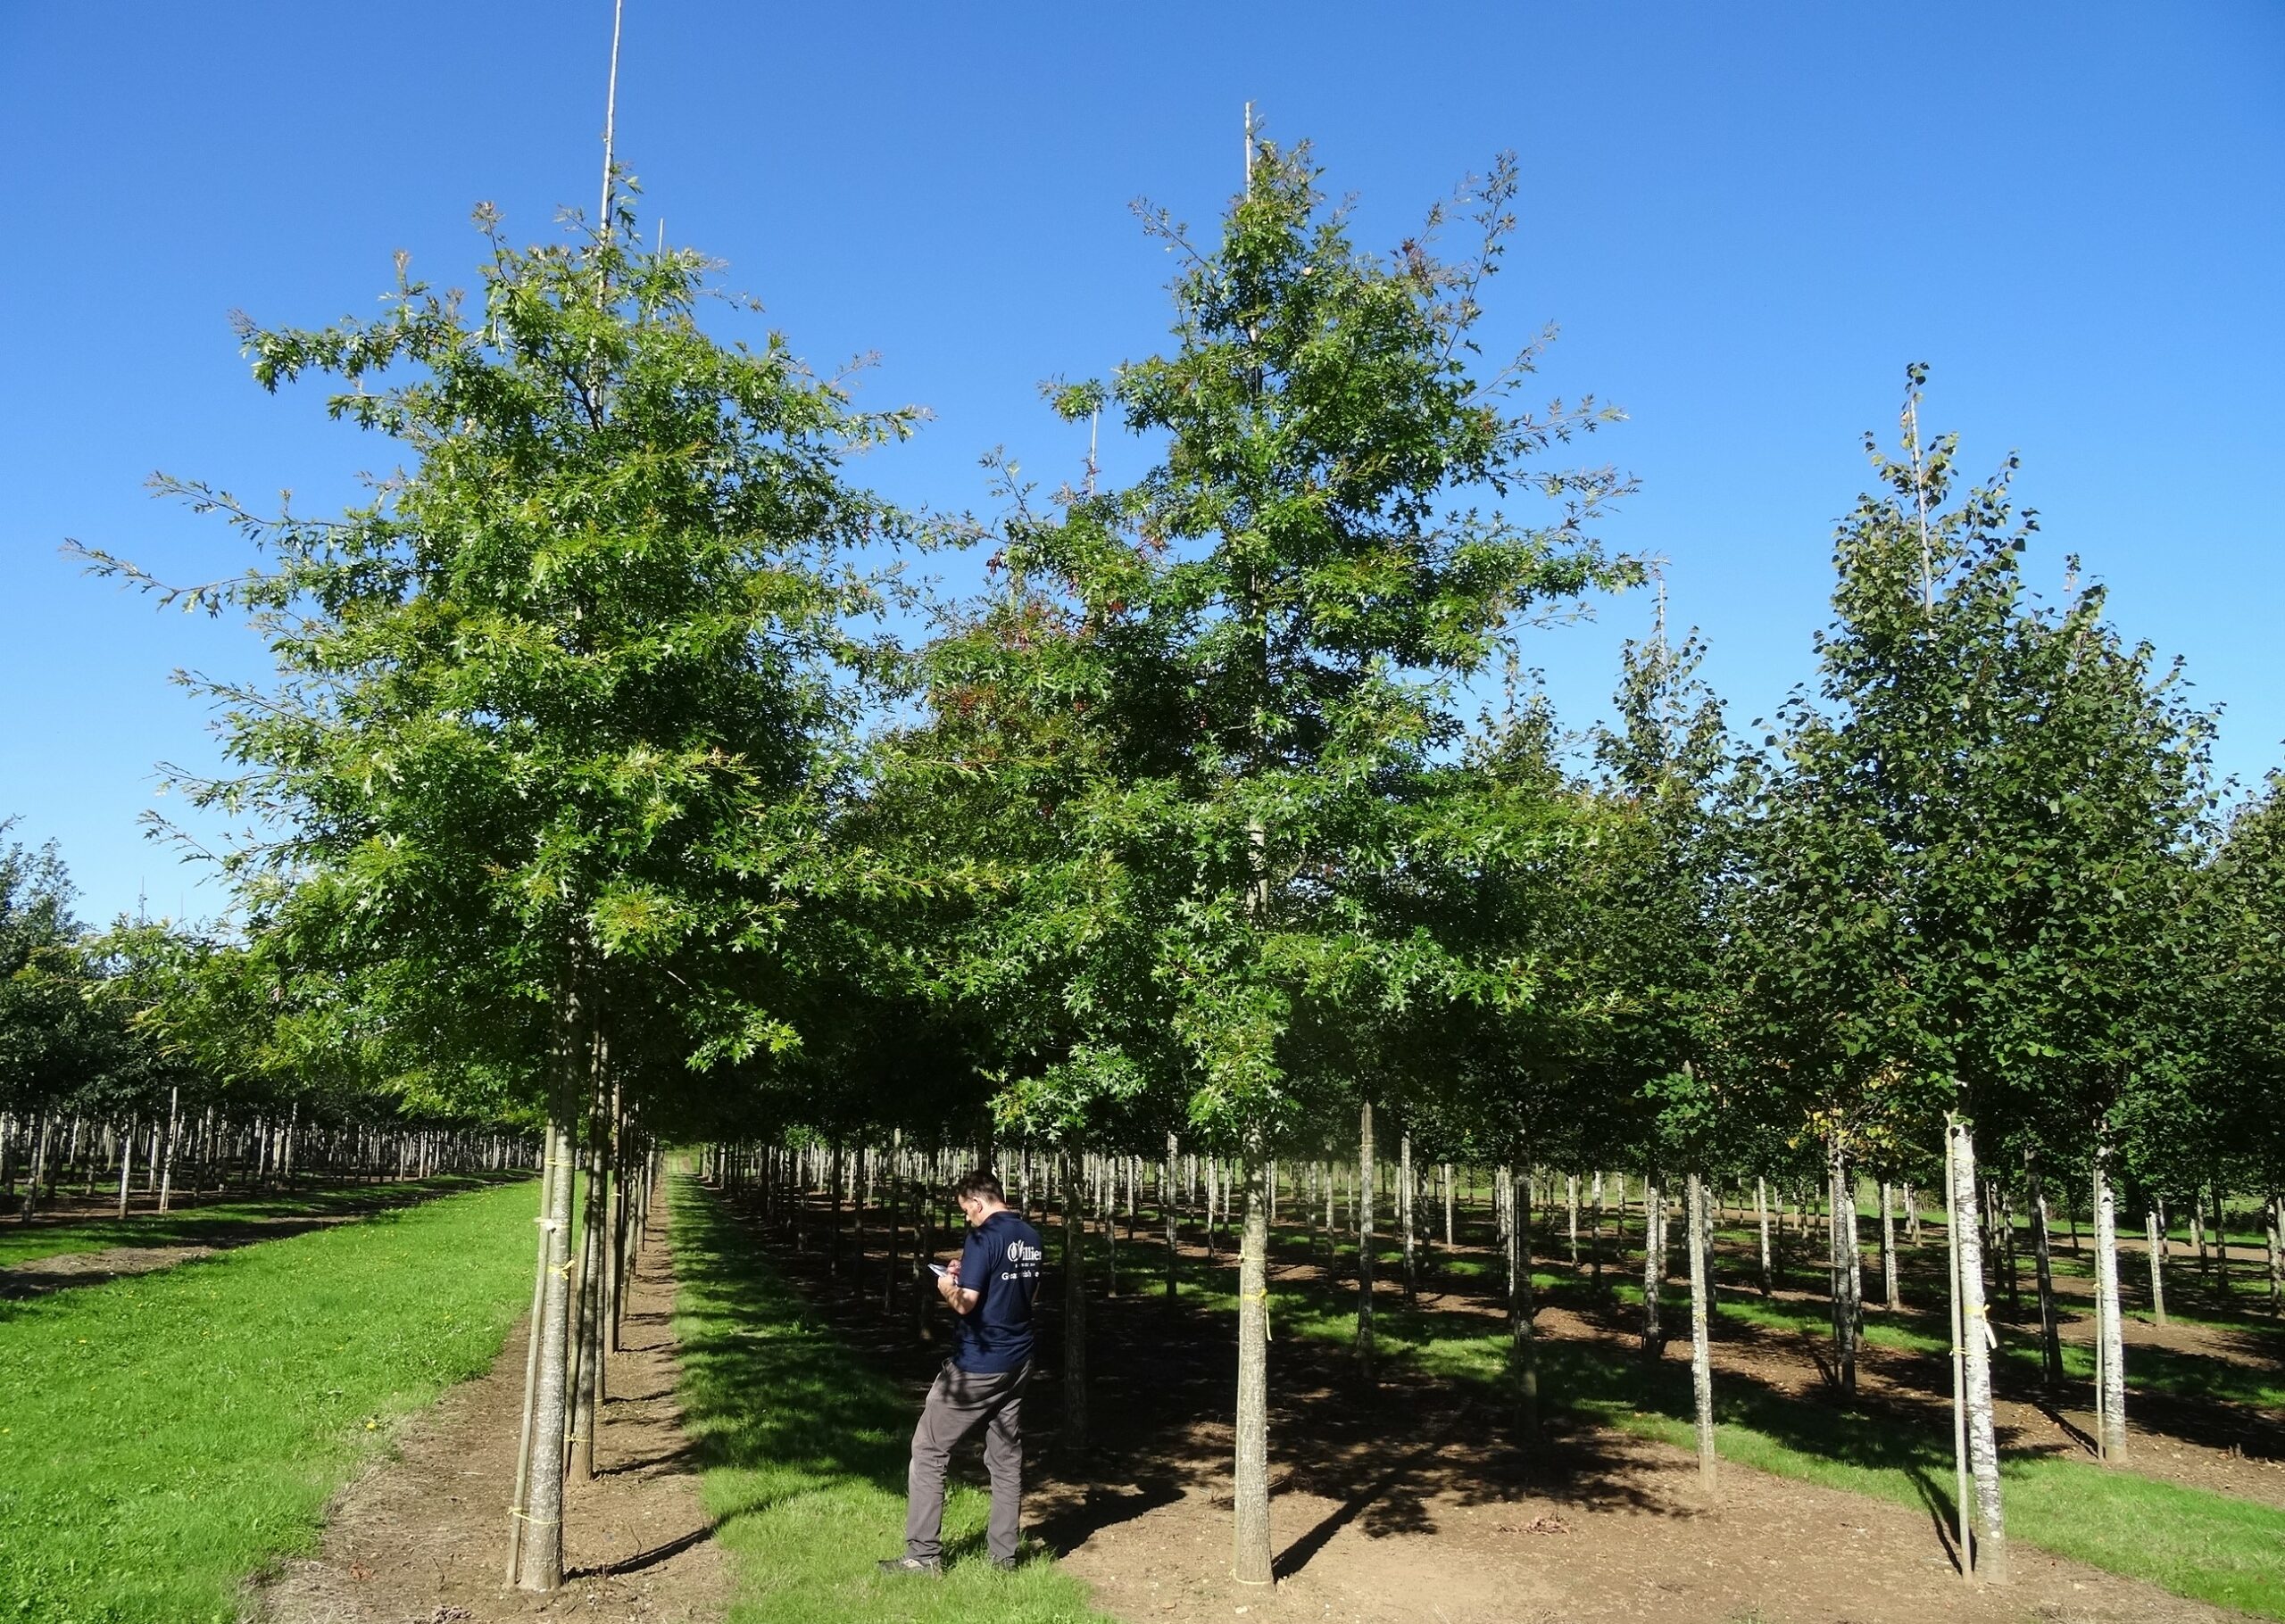 Quercus palustris semi mature trees growing in rows in field